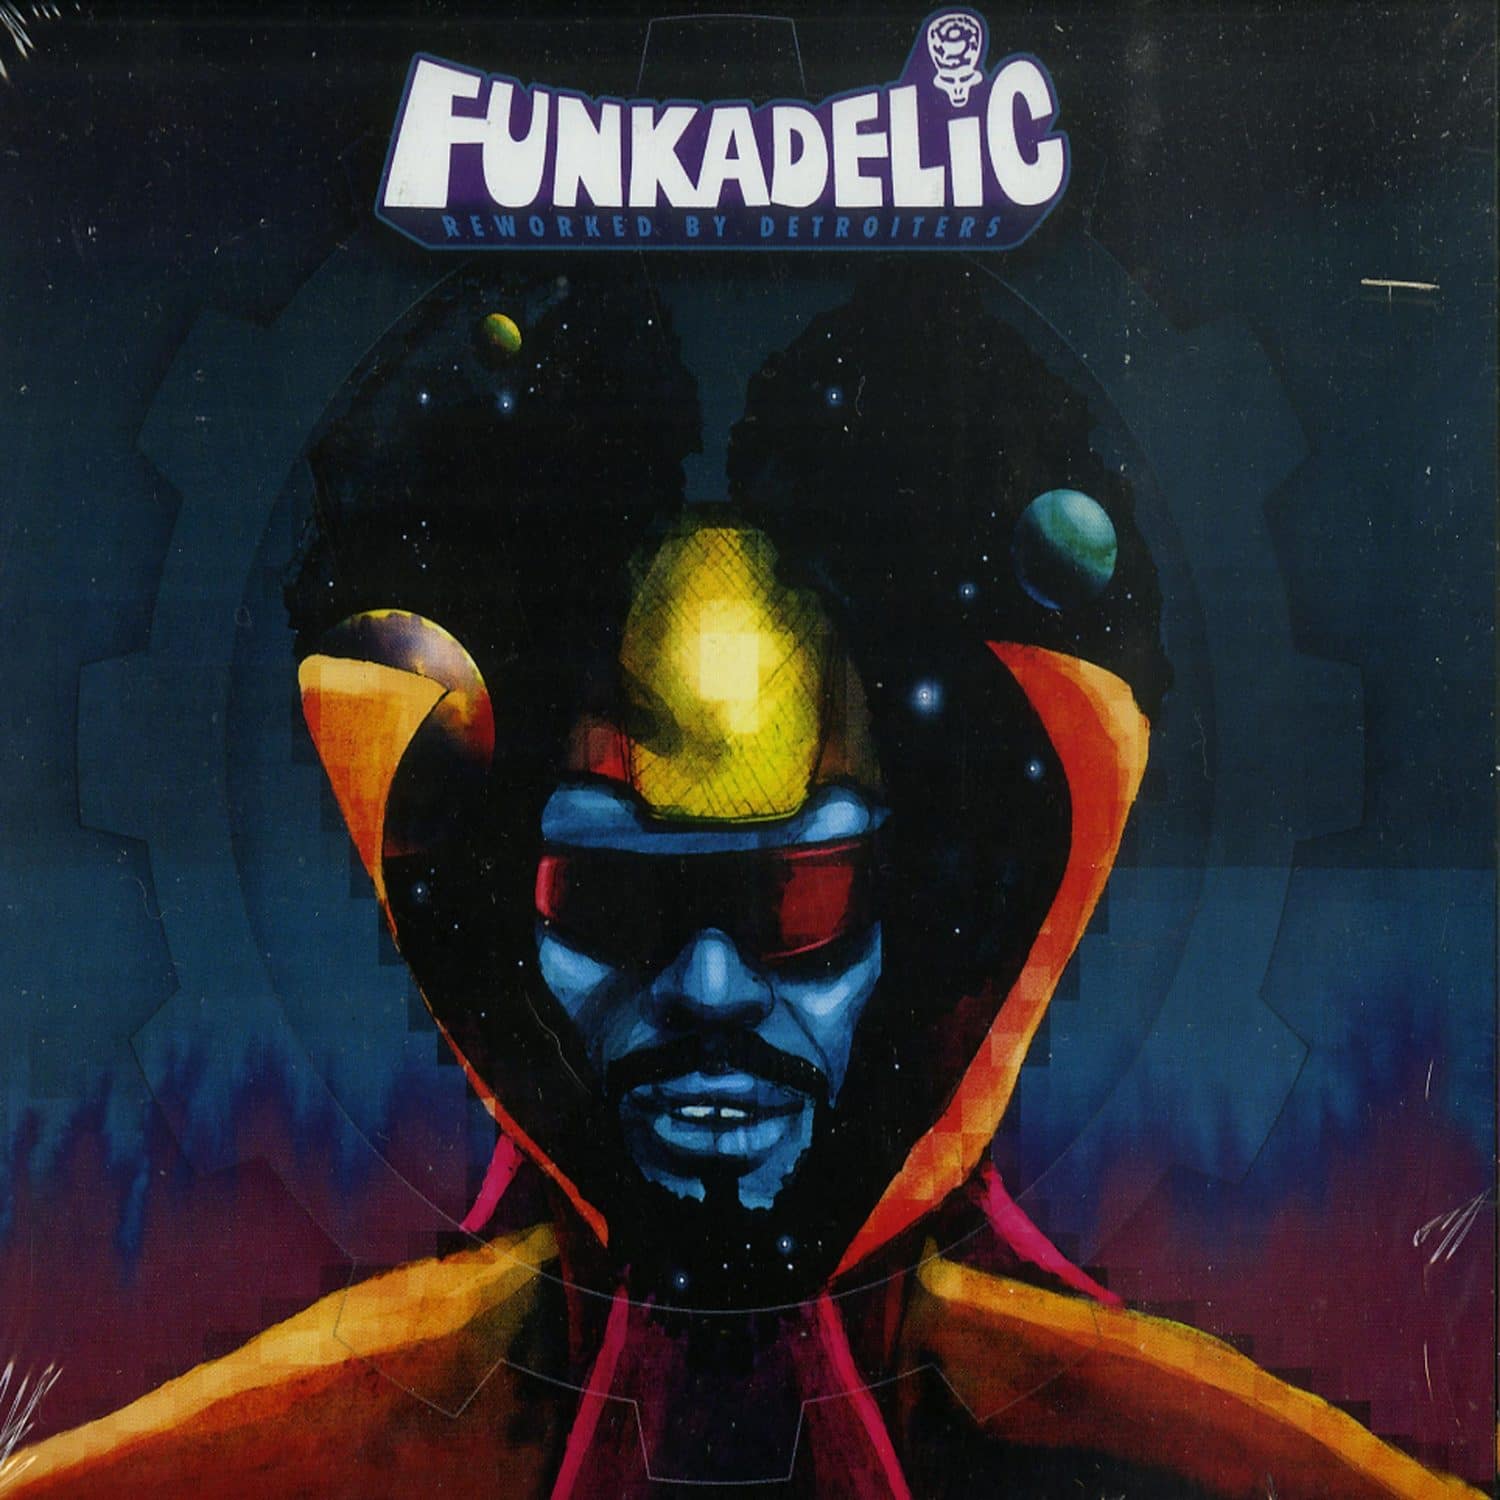 Funkadelic - REWORKED BY DETROITERS 